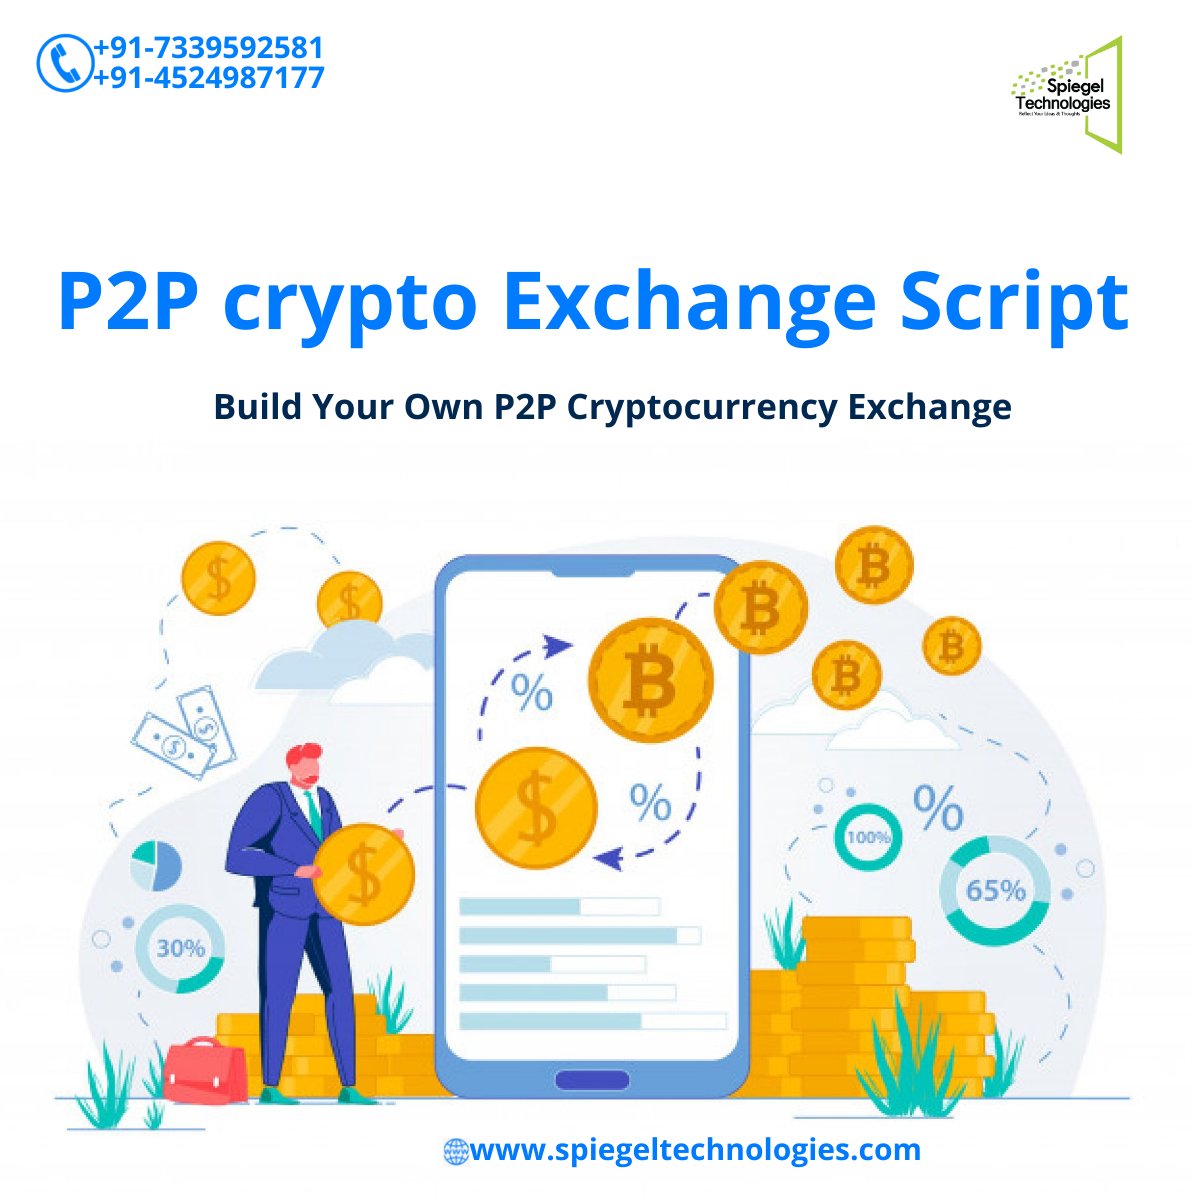 Spiegel Technologies on Twitter: "Team offers P2P crypto exchange  development services, including P2P exchanges developed from Binance  scratch, white-label exchanges, and clone-based models. Website  -https://t.co/JfKu2aezqM #P2PMarketplace #Dubai ...